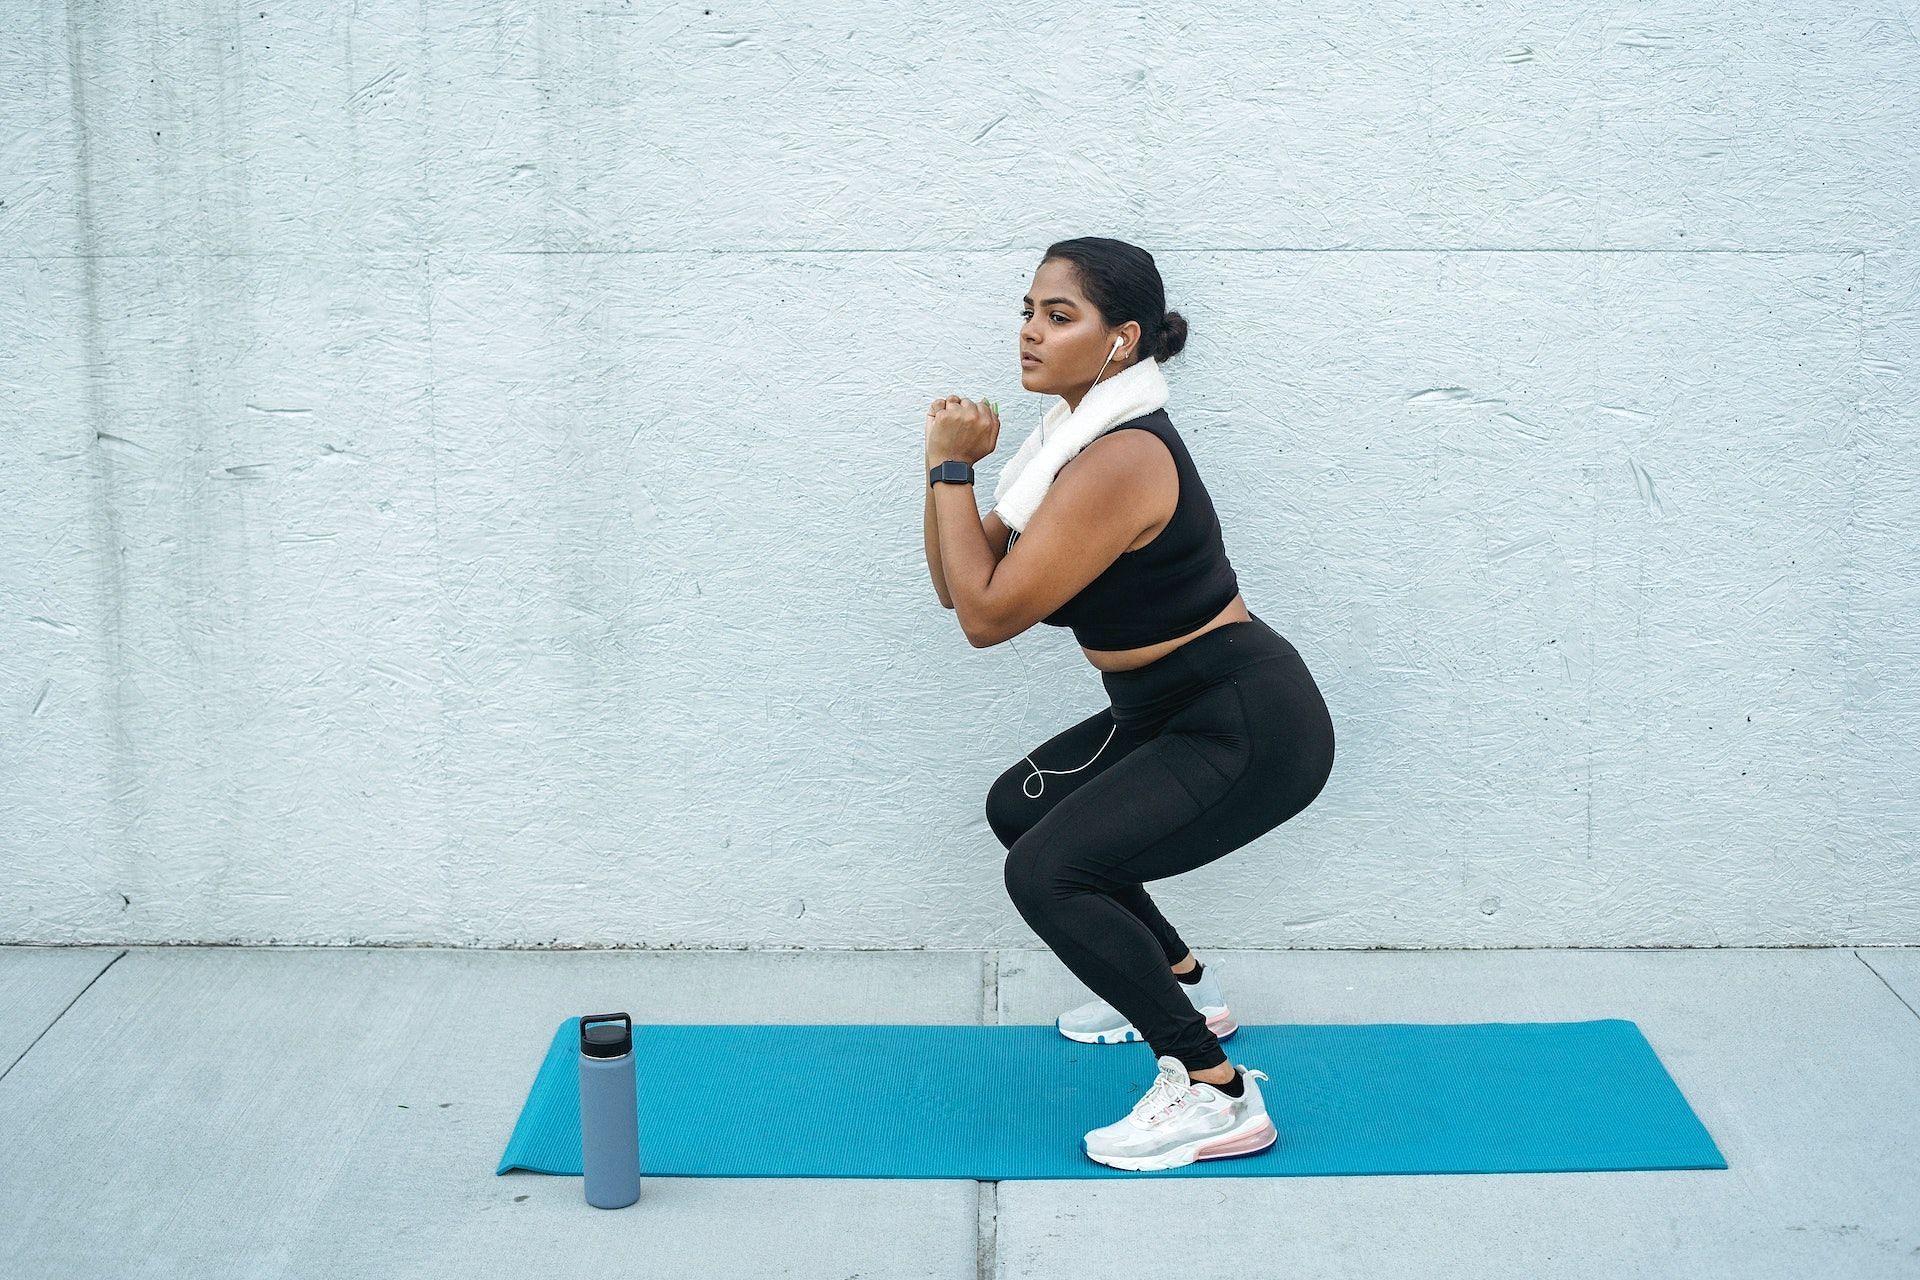 Lower glute exercises improve the appearance of the butts. (Photo via Pexels/Ketut Subiyanto)